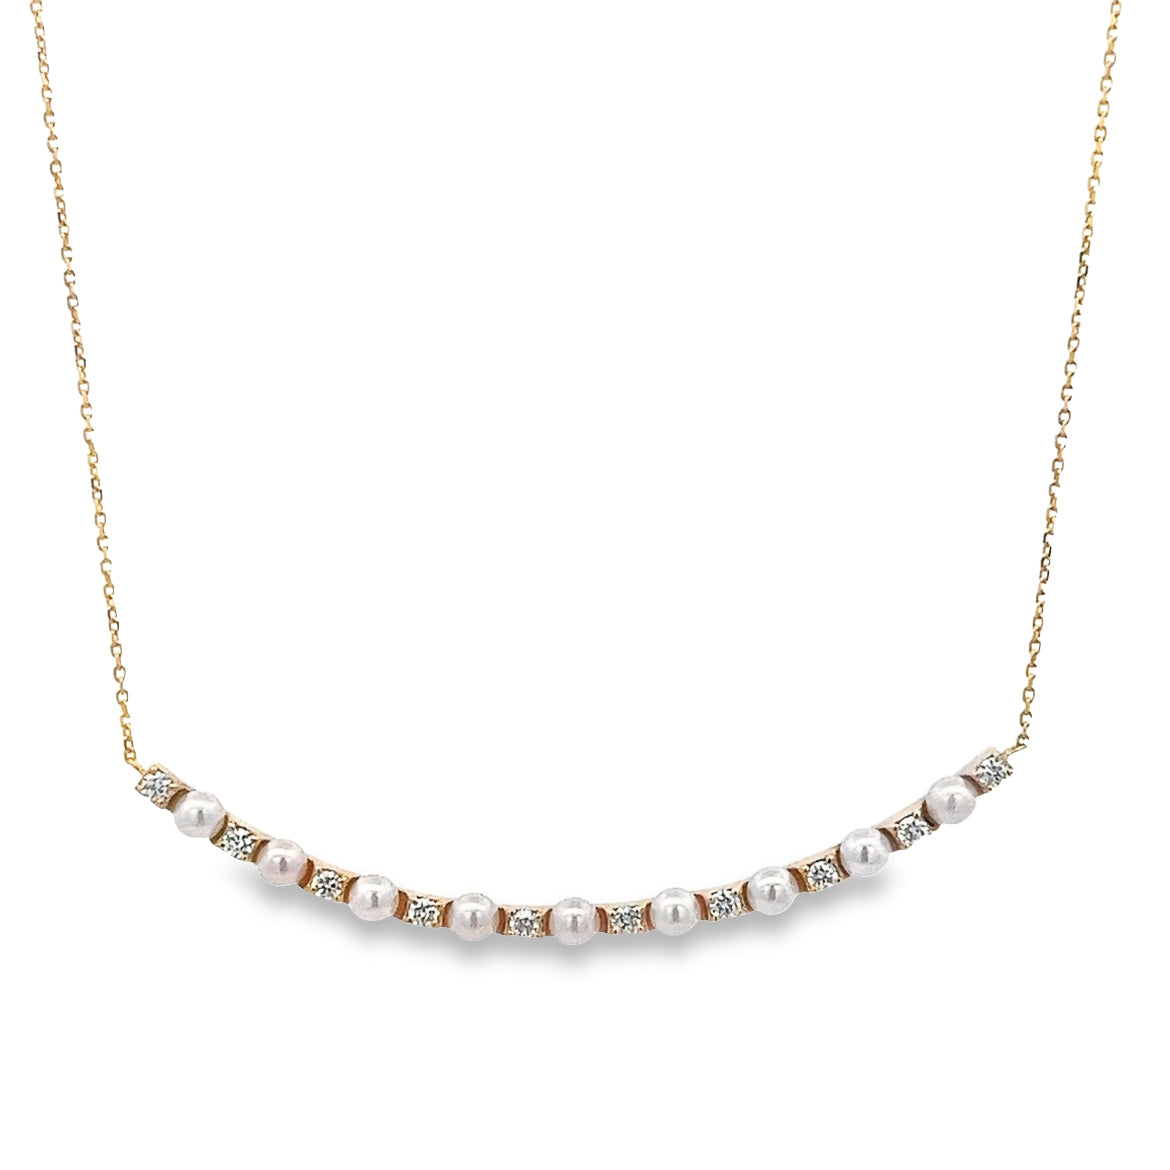 18K GOLD CURVE PEARL AND DIAMONDS BAR NECKLACE